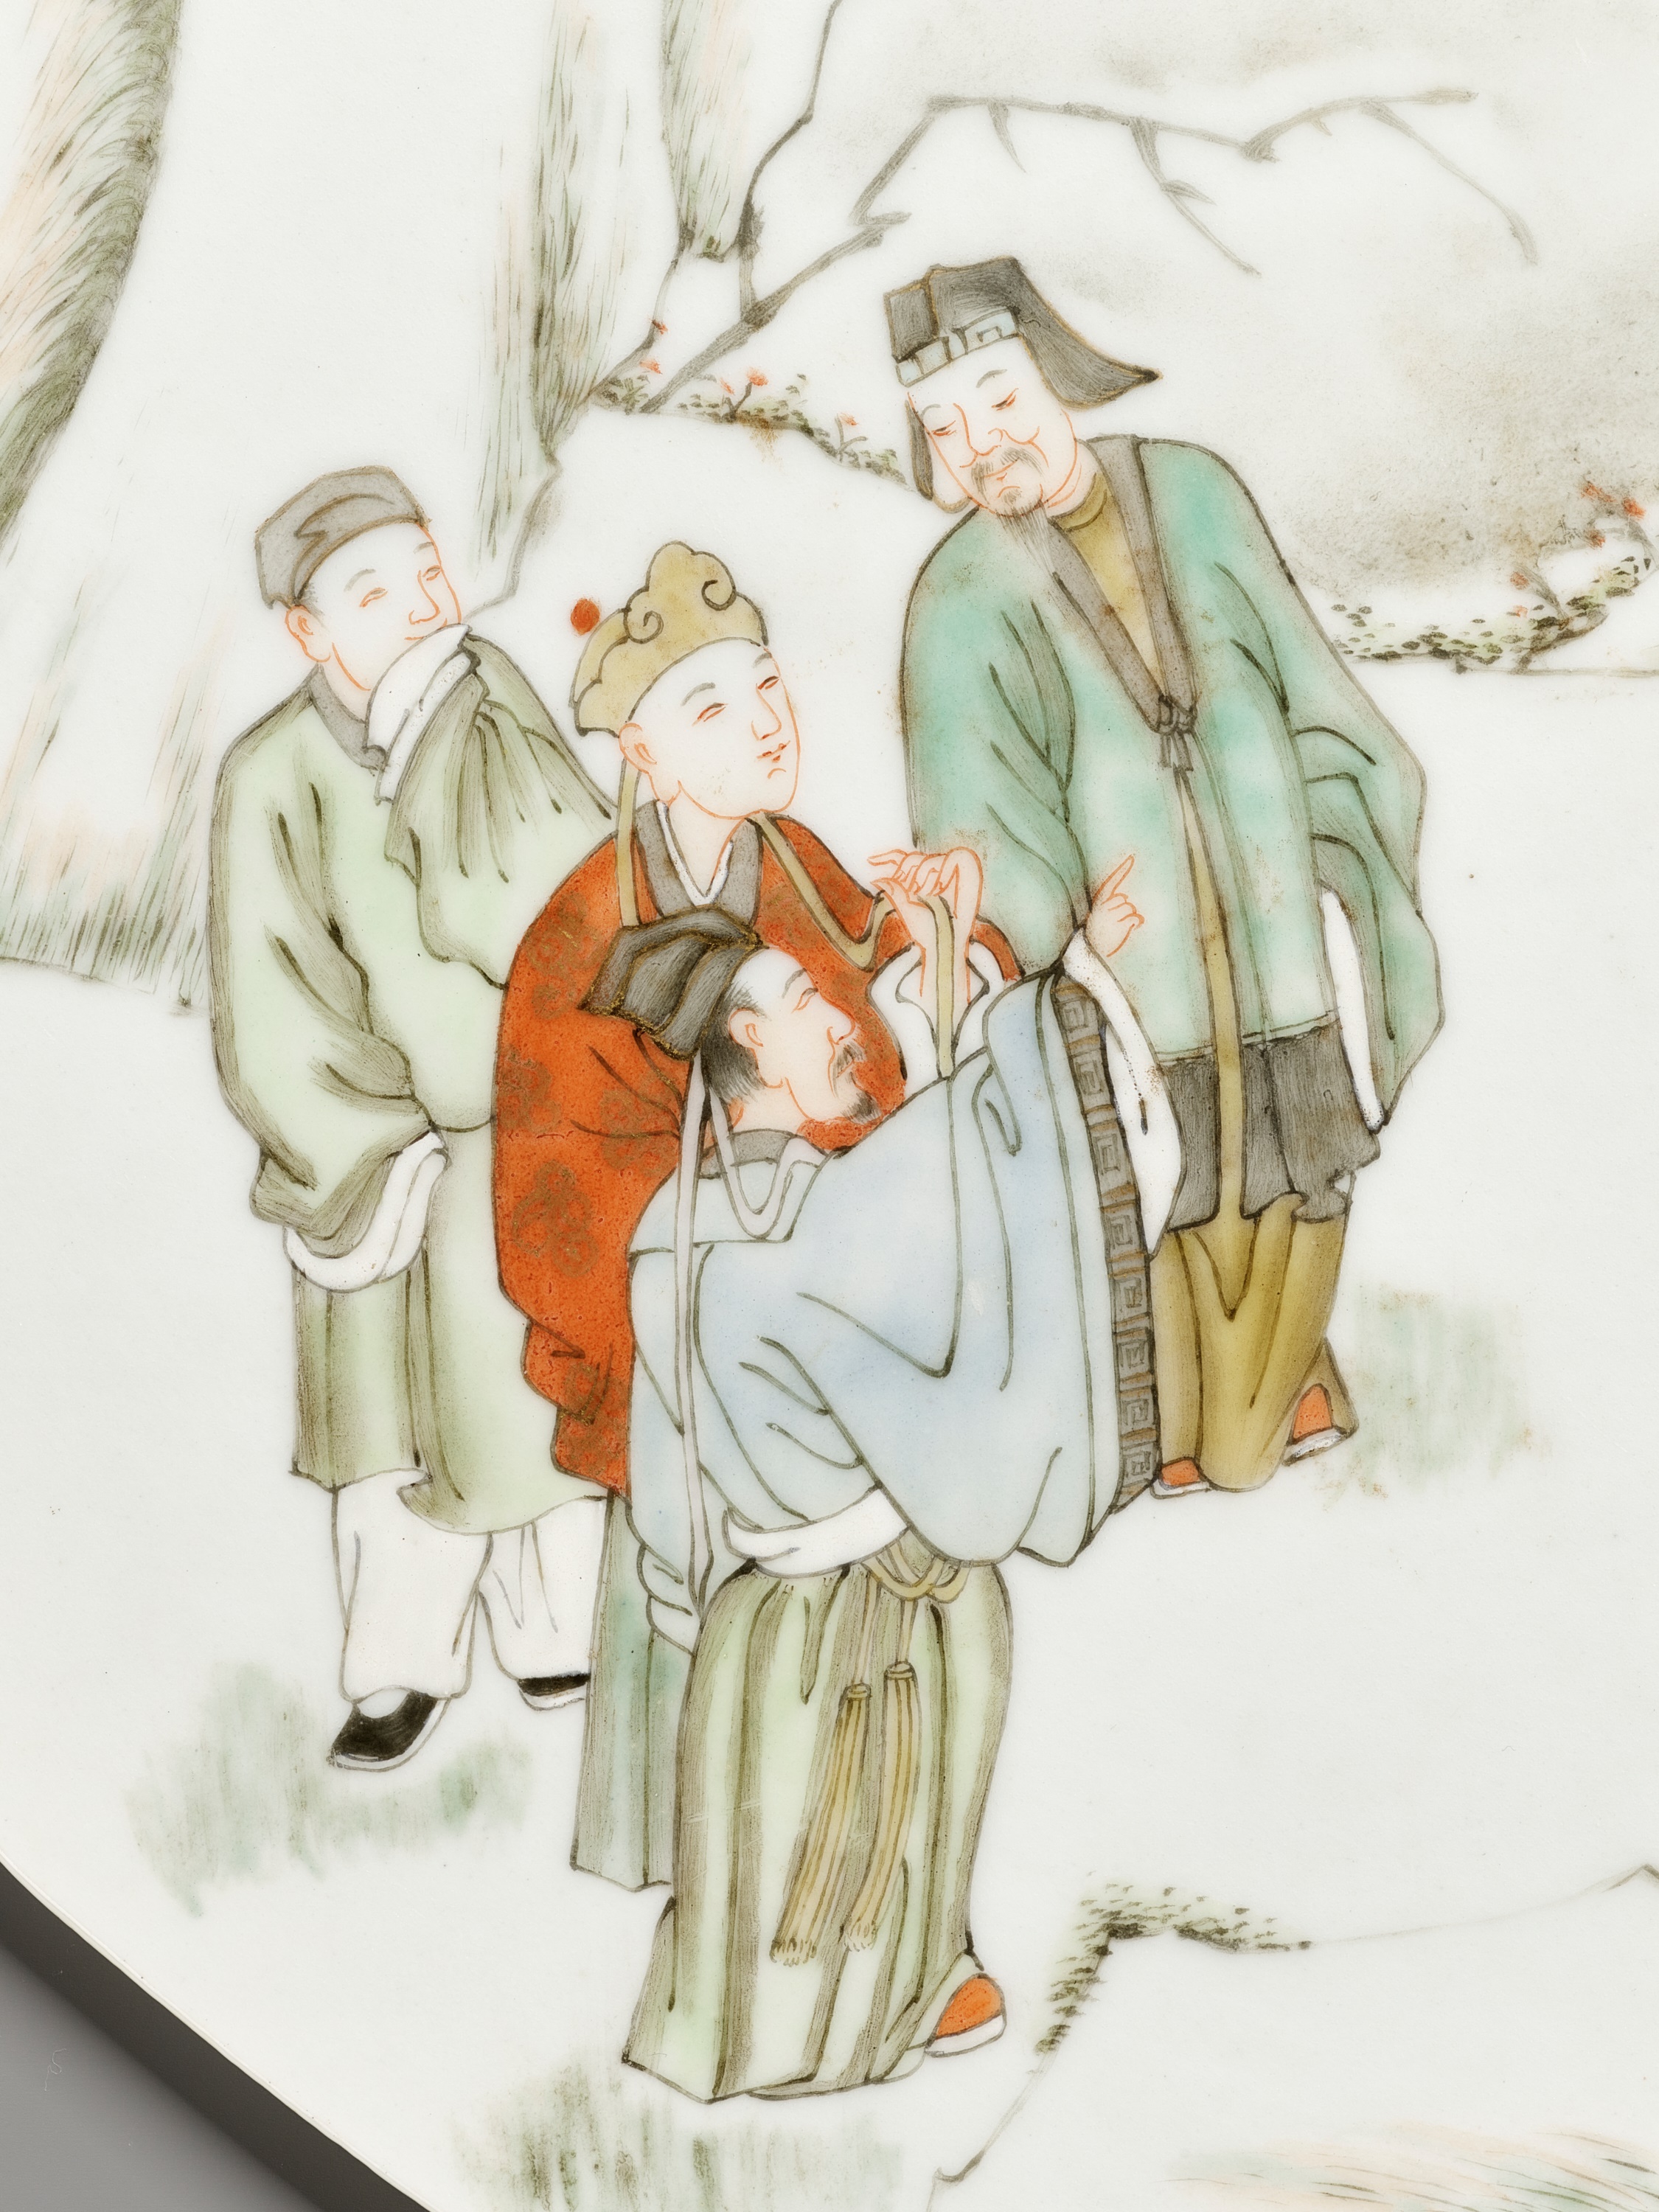 A FINELY DETAILED 'JOURNEY TO THE WEST' FAMILLE ROSE PORCELAIN PLAQUE, QING DYNASTY - Image 3 of 7